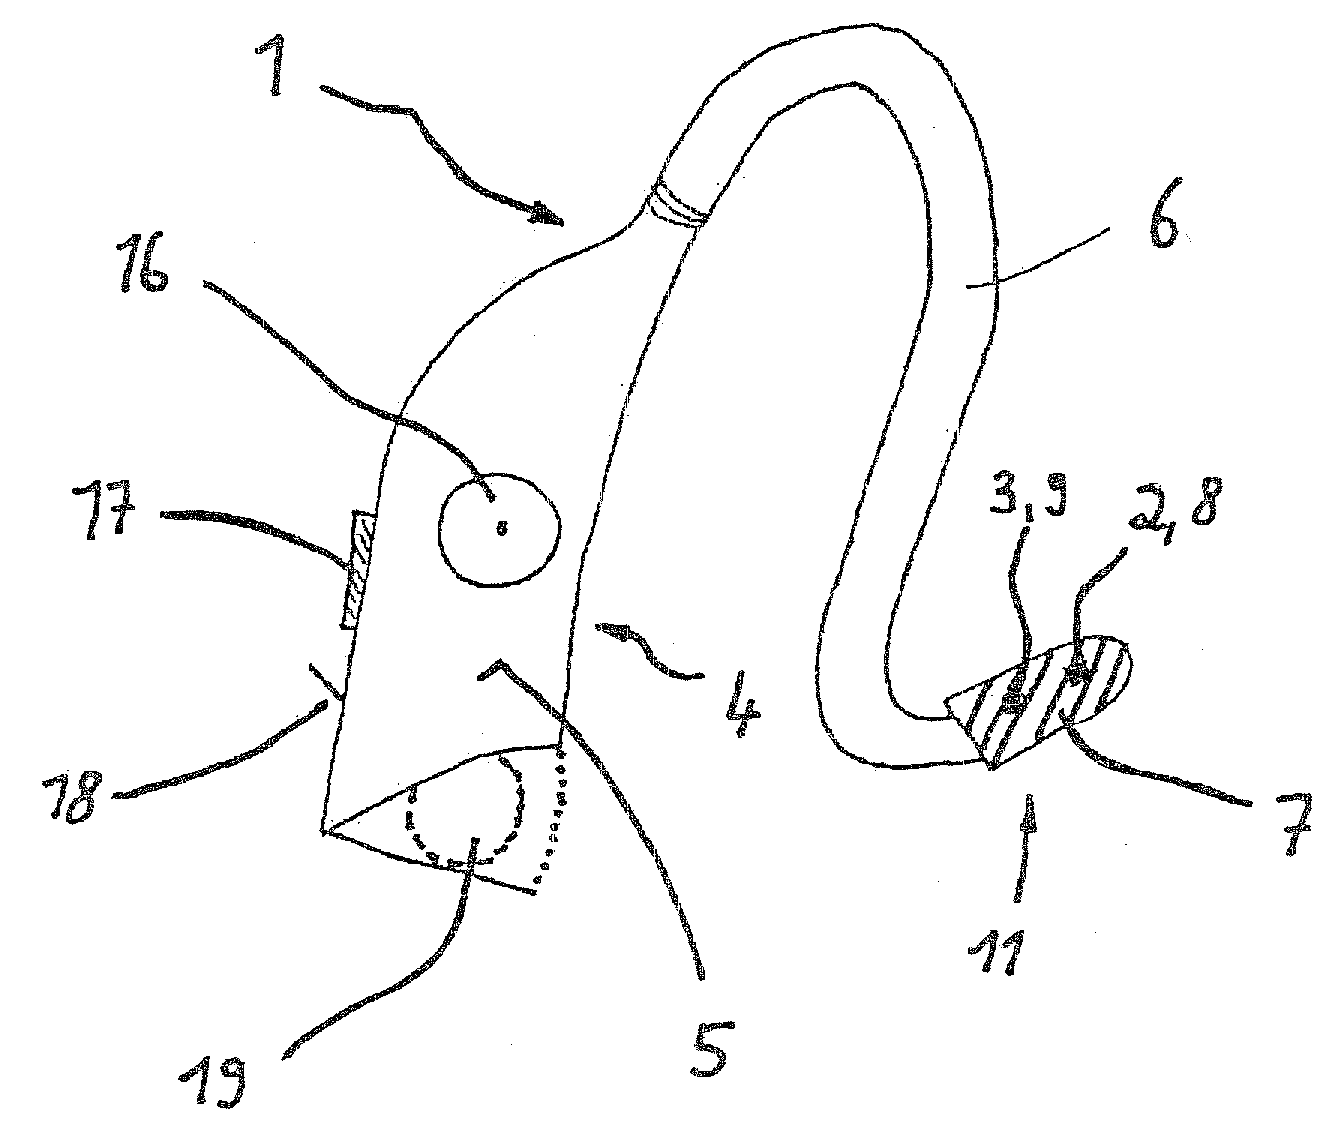 Device and method for the transdermal stimulation of a nerve of the human body